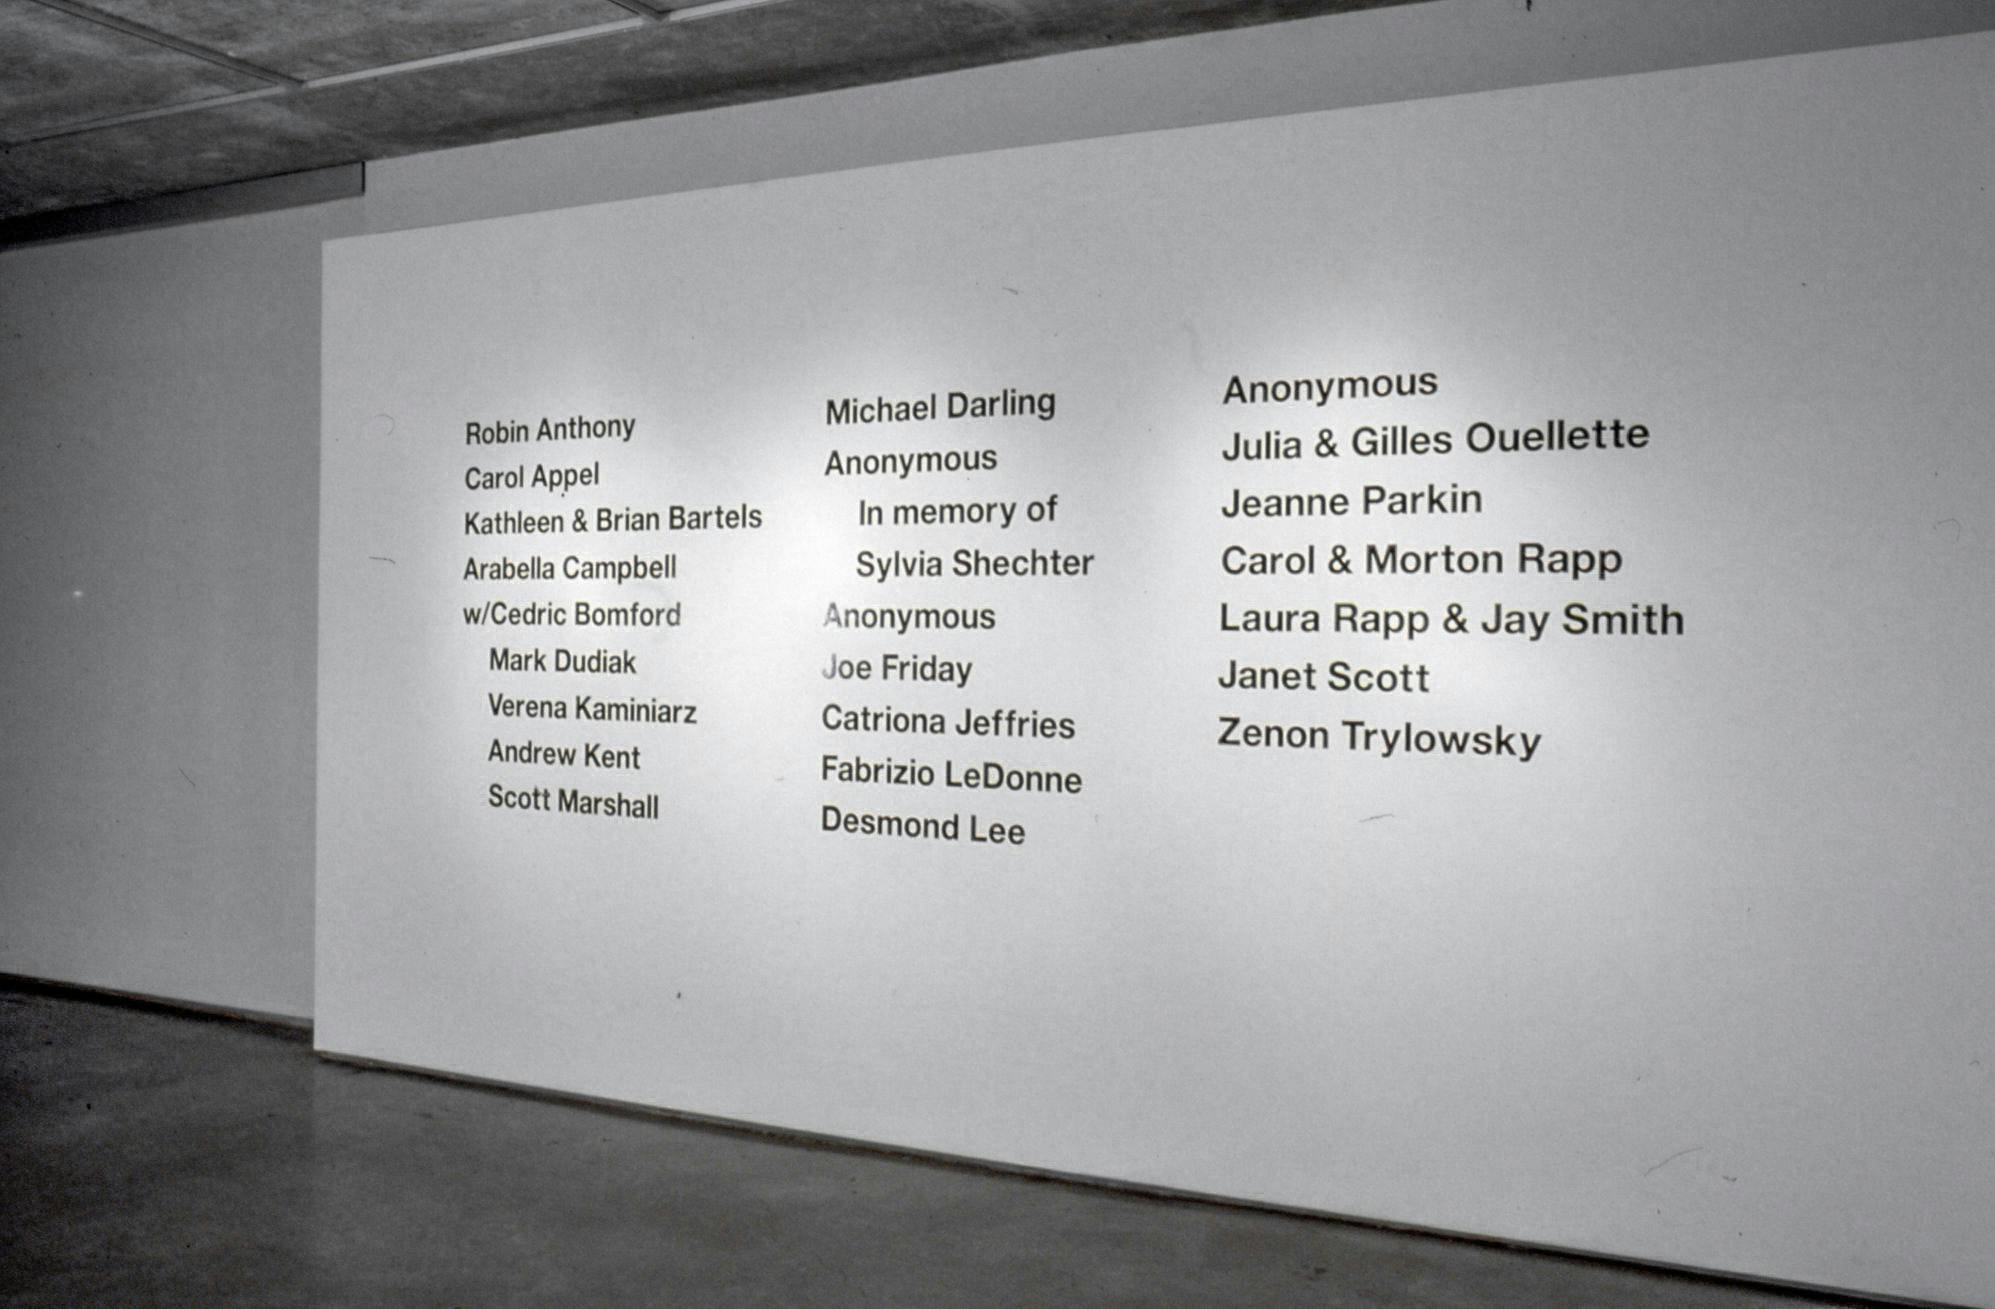 This is an installation shot of a gallery space. On a white wall, the names of people are printed in a large black font. There are two listed as “Anonymous” in this list of names. 